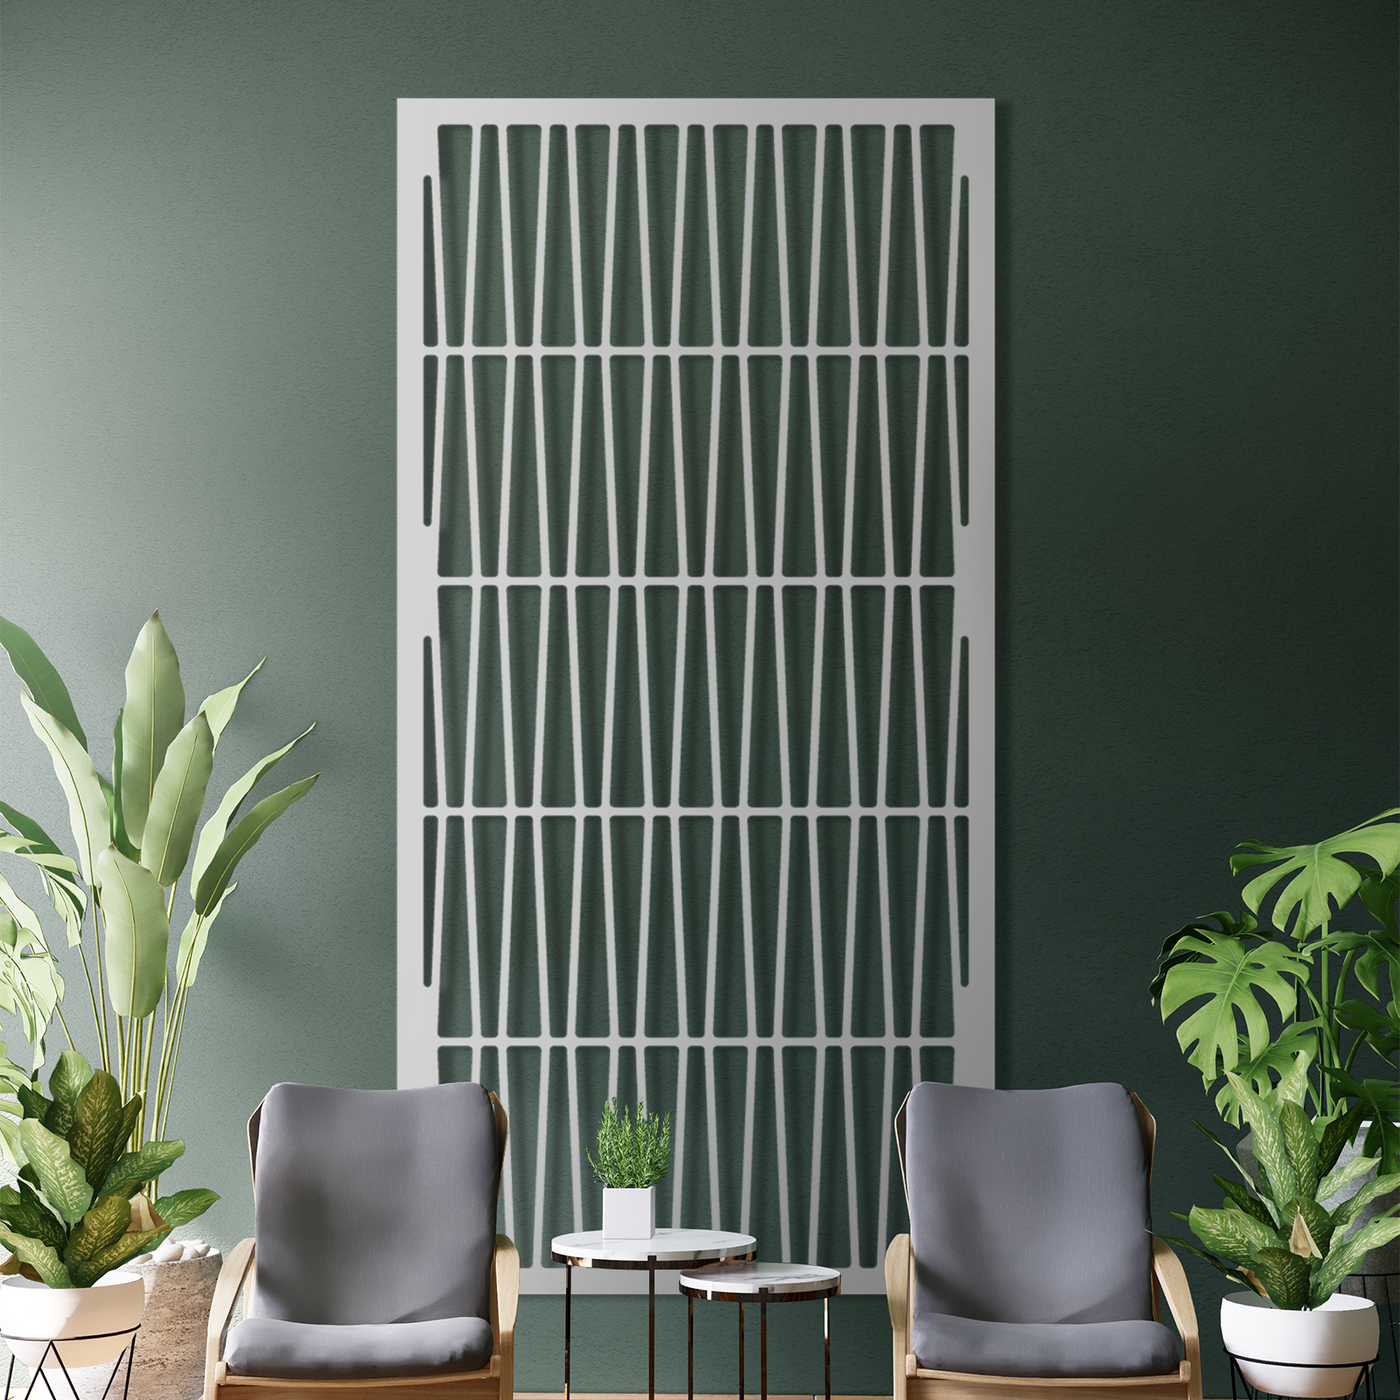 Woven Mesh Metal Garden Screen: Quality You Can Count On